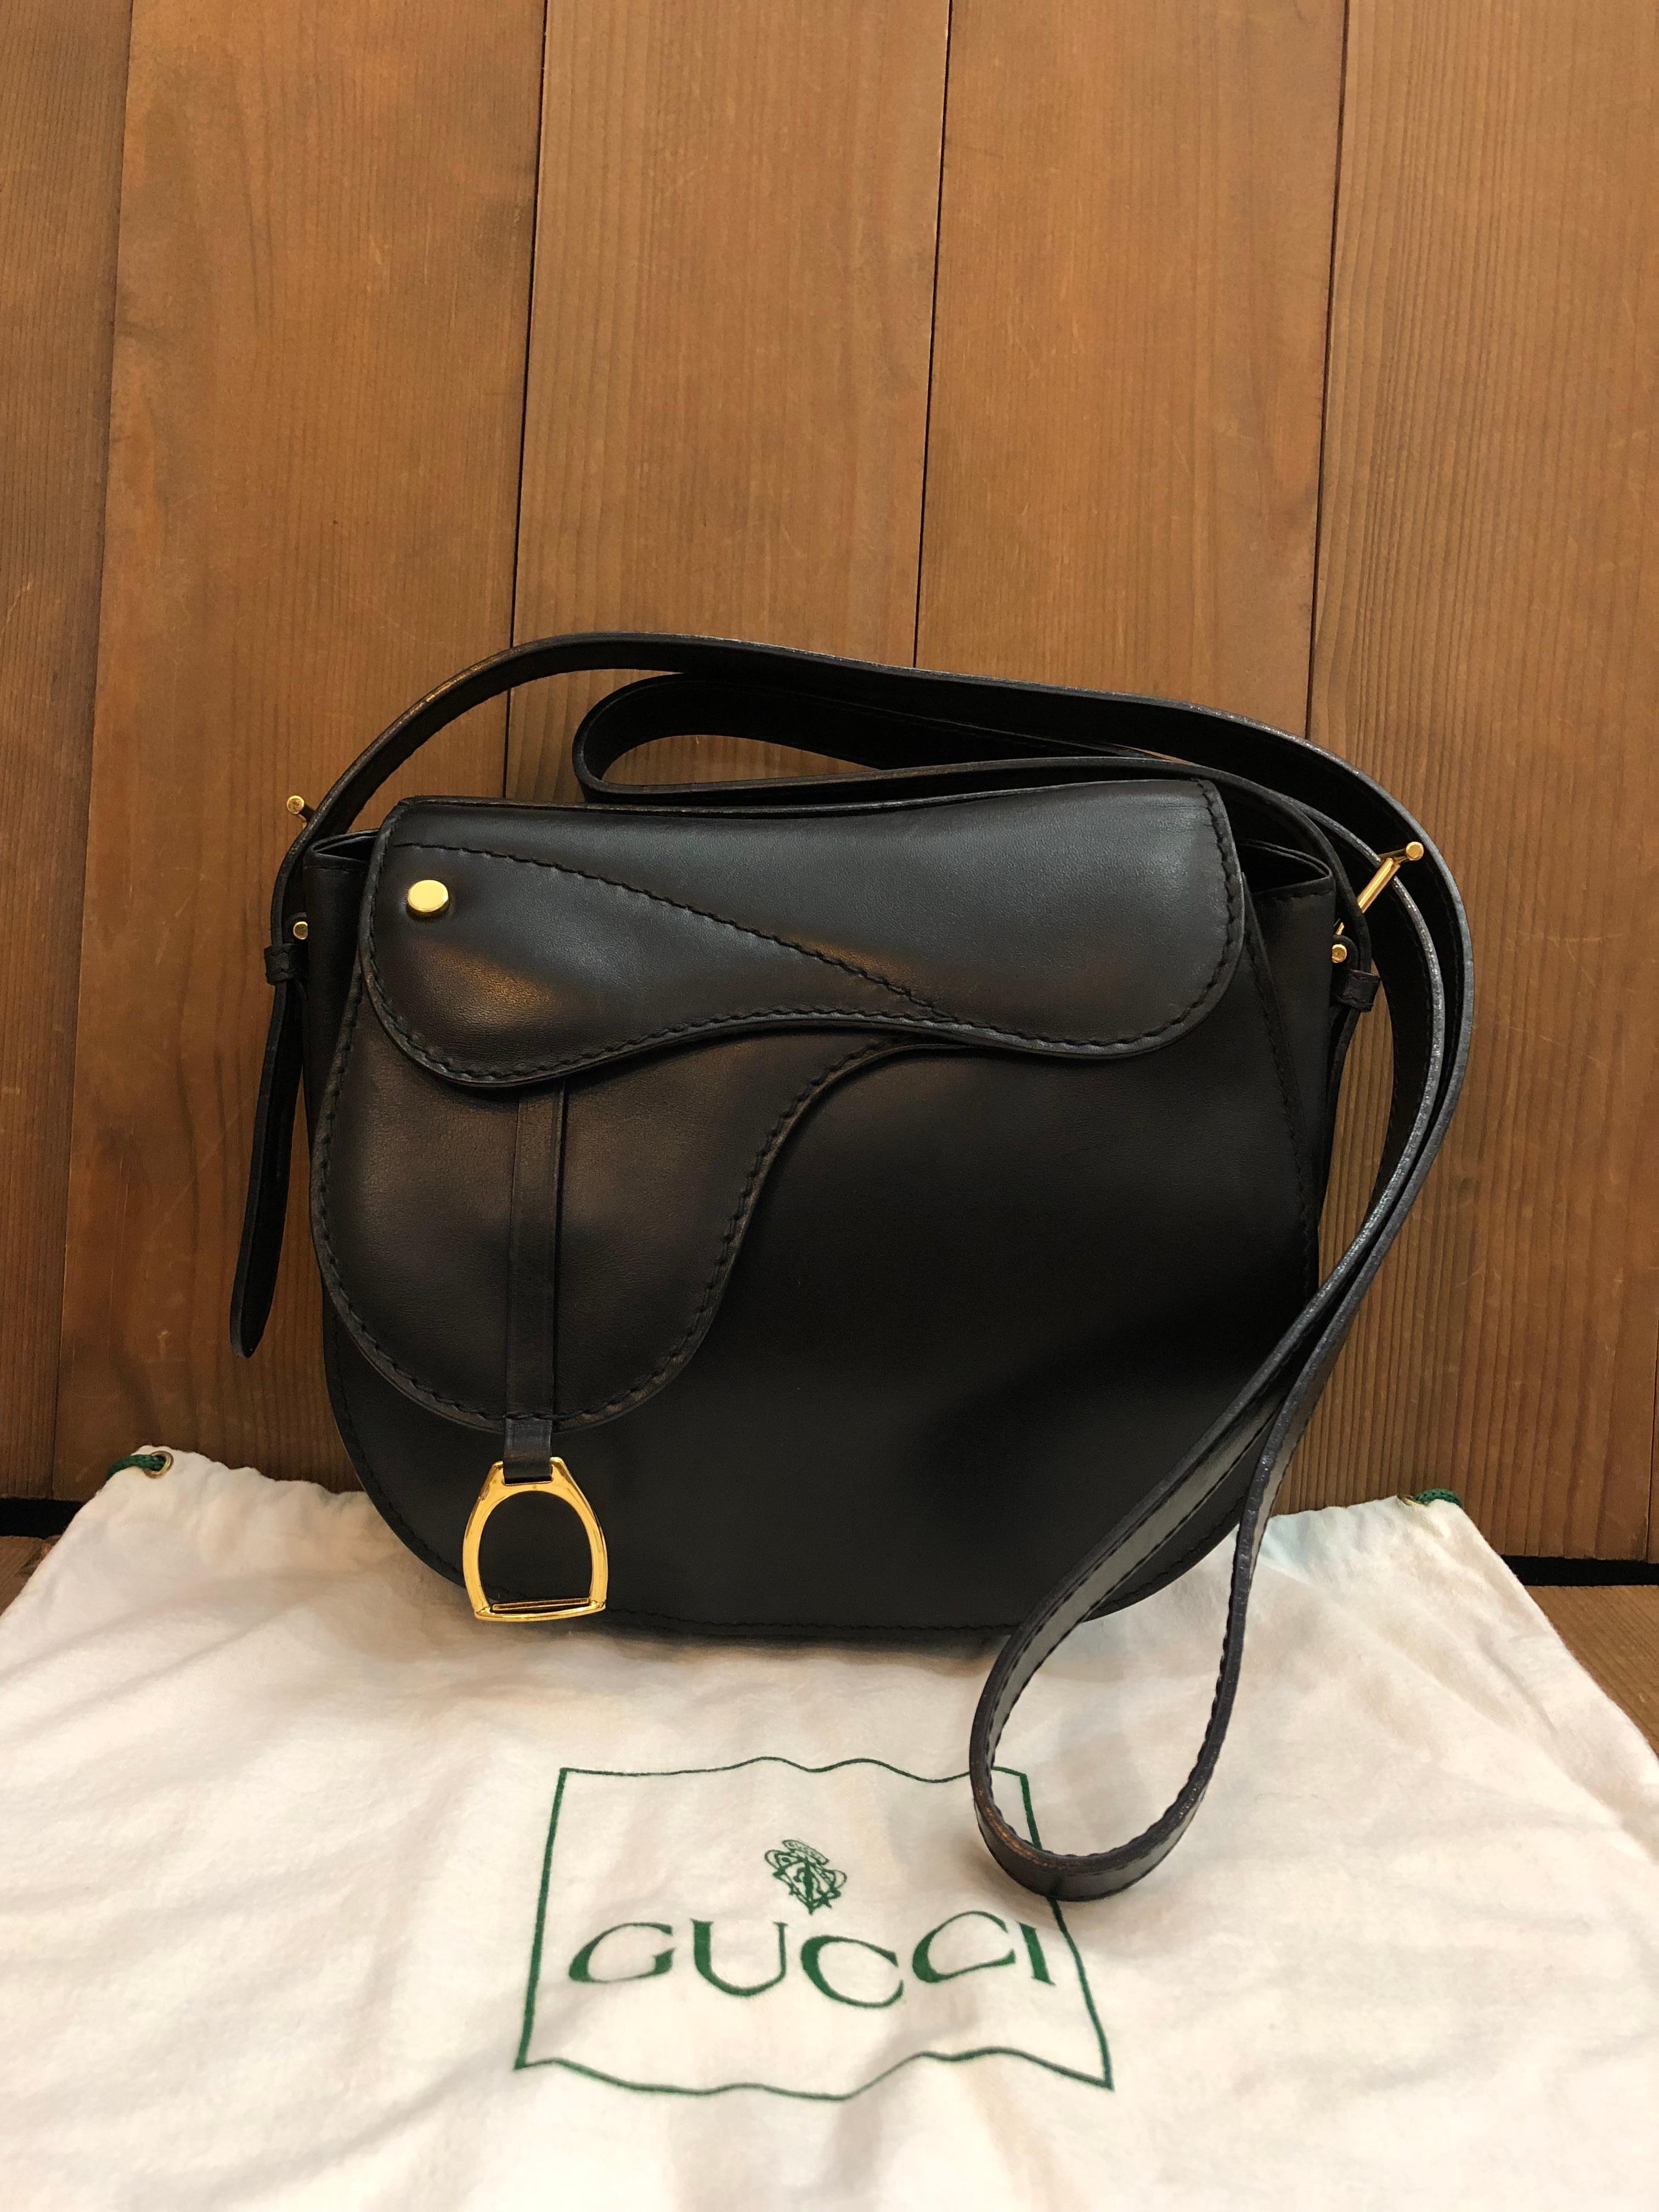 This vintage GUCCI mini saddle bag is crafted of smooth calfskin leather in black featuring gold toned hardware and equestrian accent. Front magnetic snap closure opens to a coated interior which has been professionally cleaned featuring a zippered